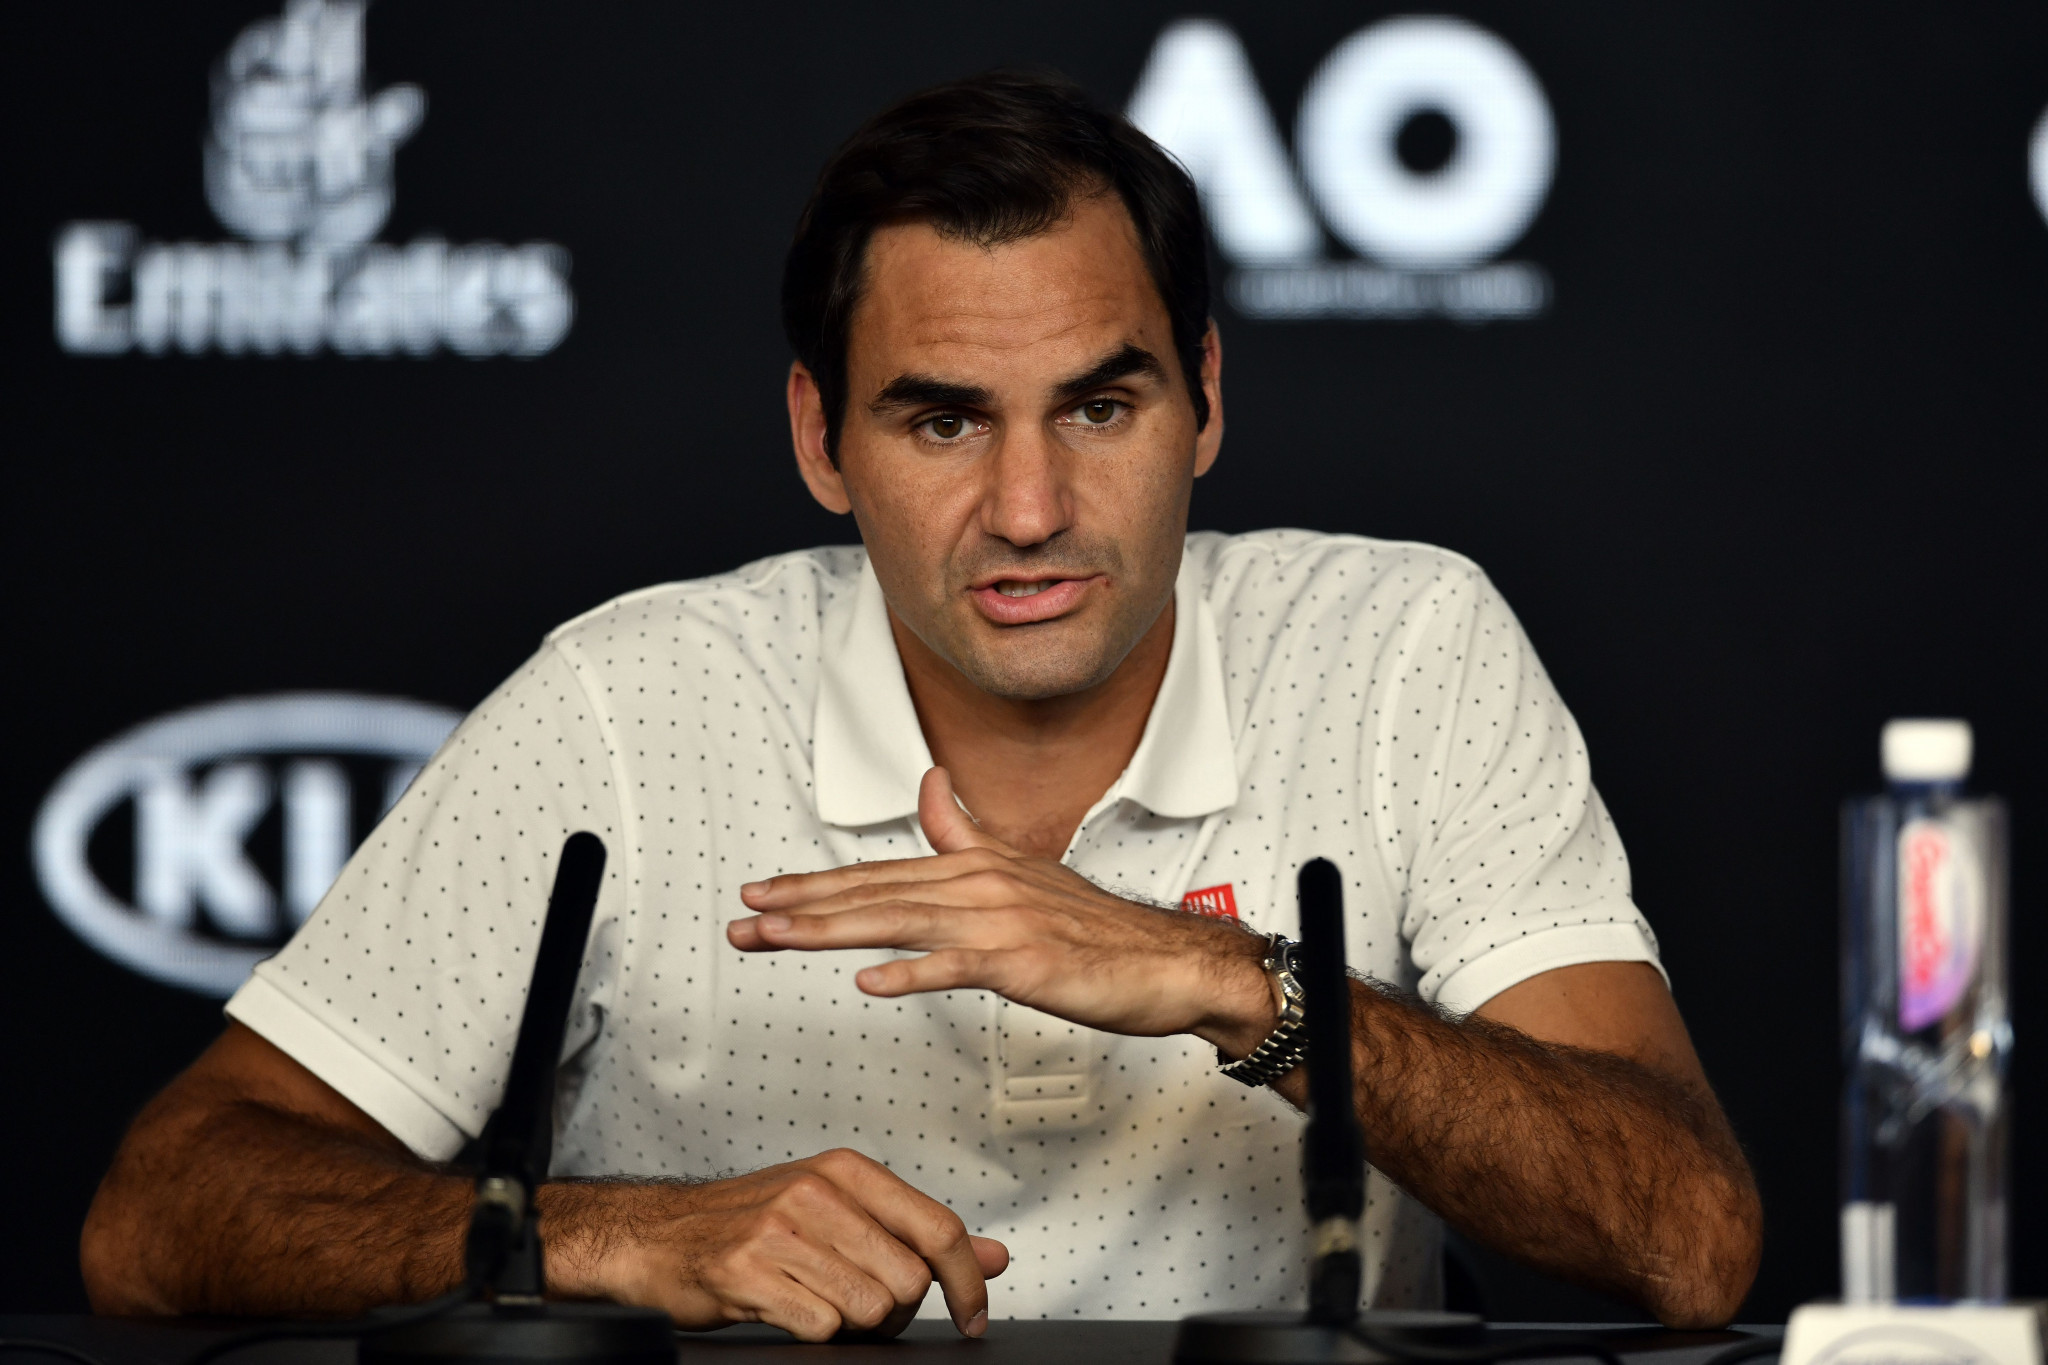 Roger Federer addresses the issue of air quality and athlete safety in a press conference ahead of the Australian Open tennis competition that begins tomorrow in Melbourne ©Getty Images